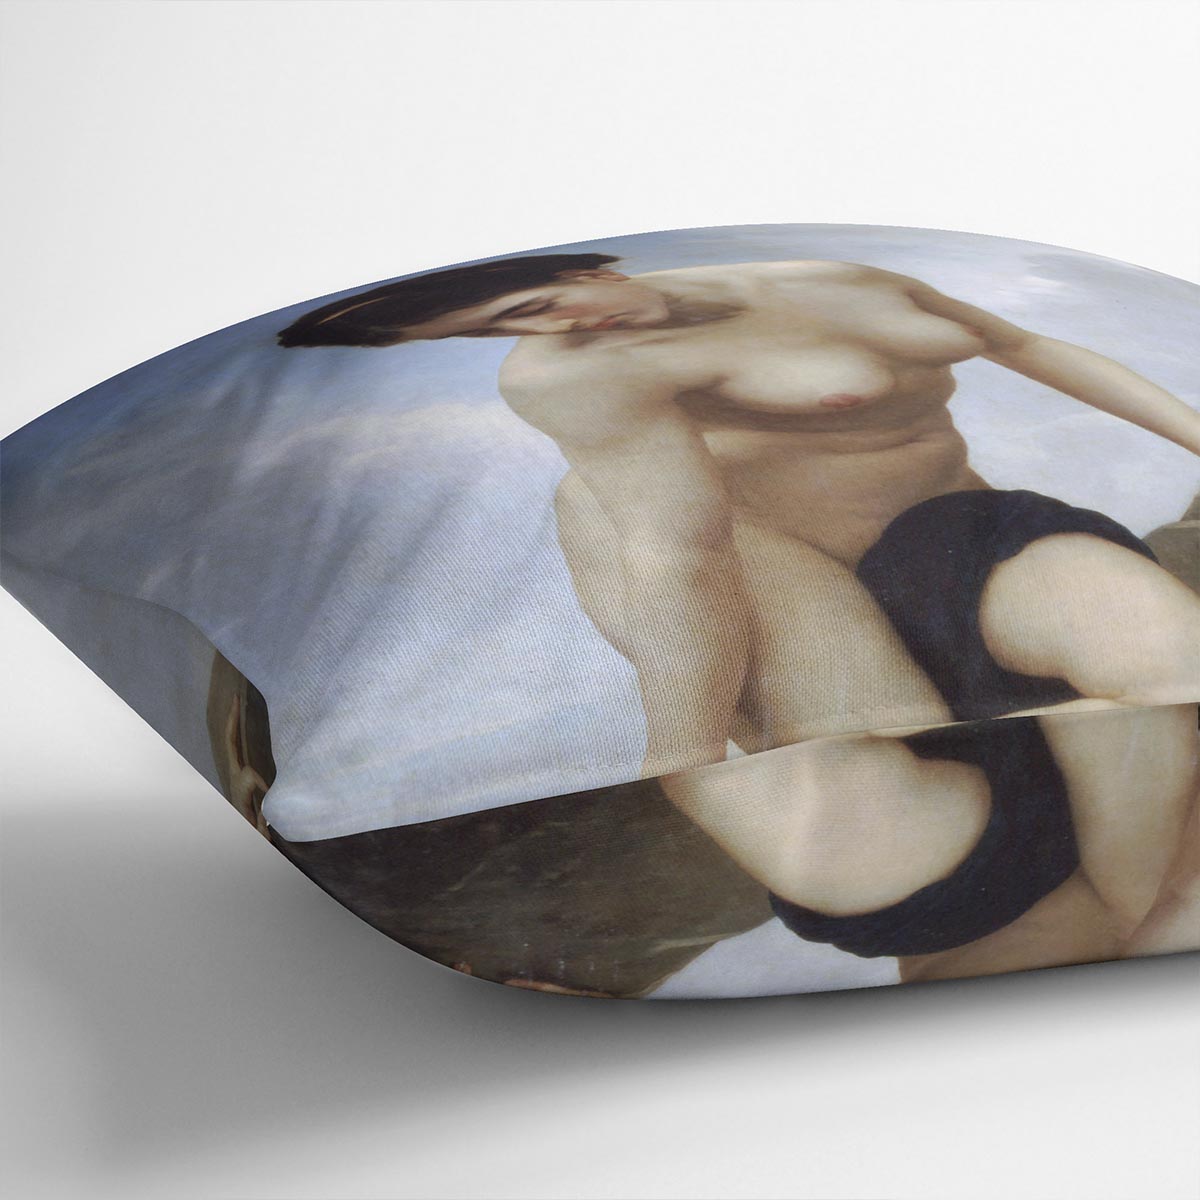 After the Bath By Bouguereau Cushion